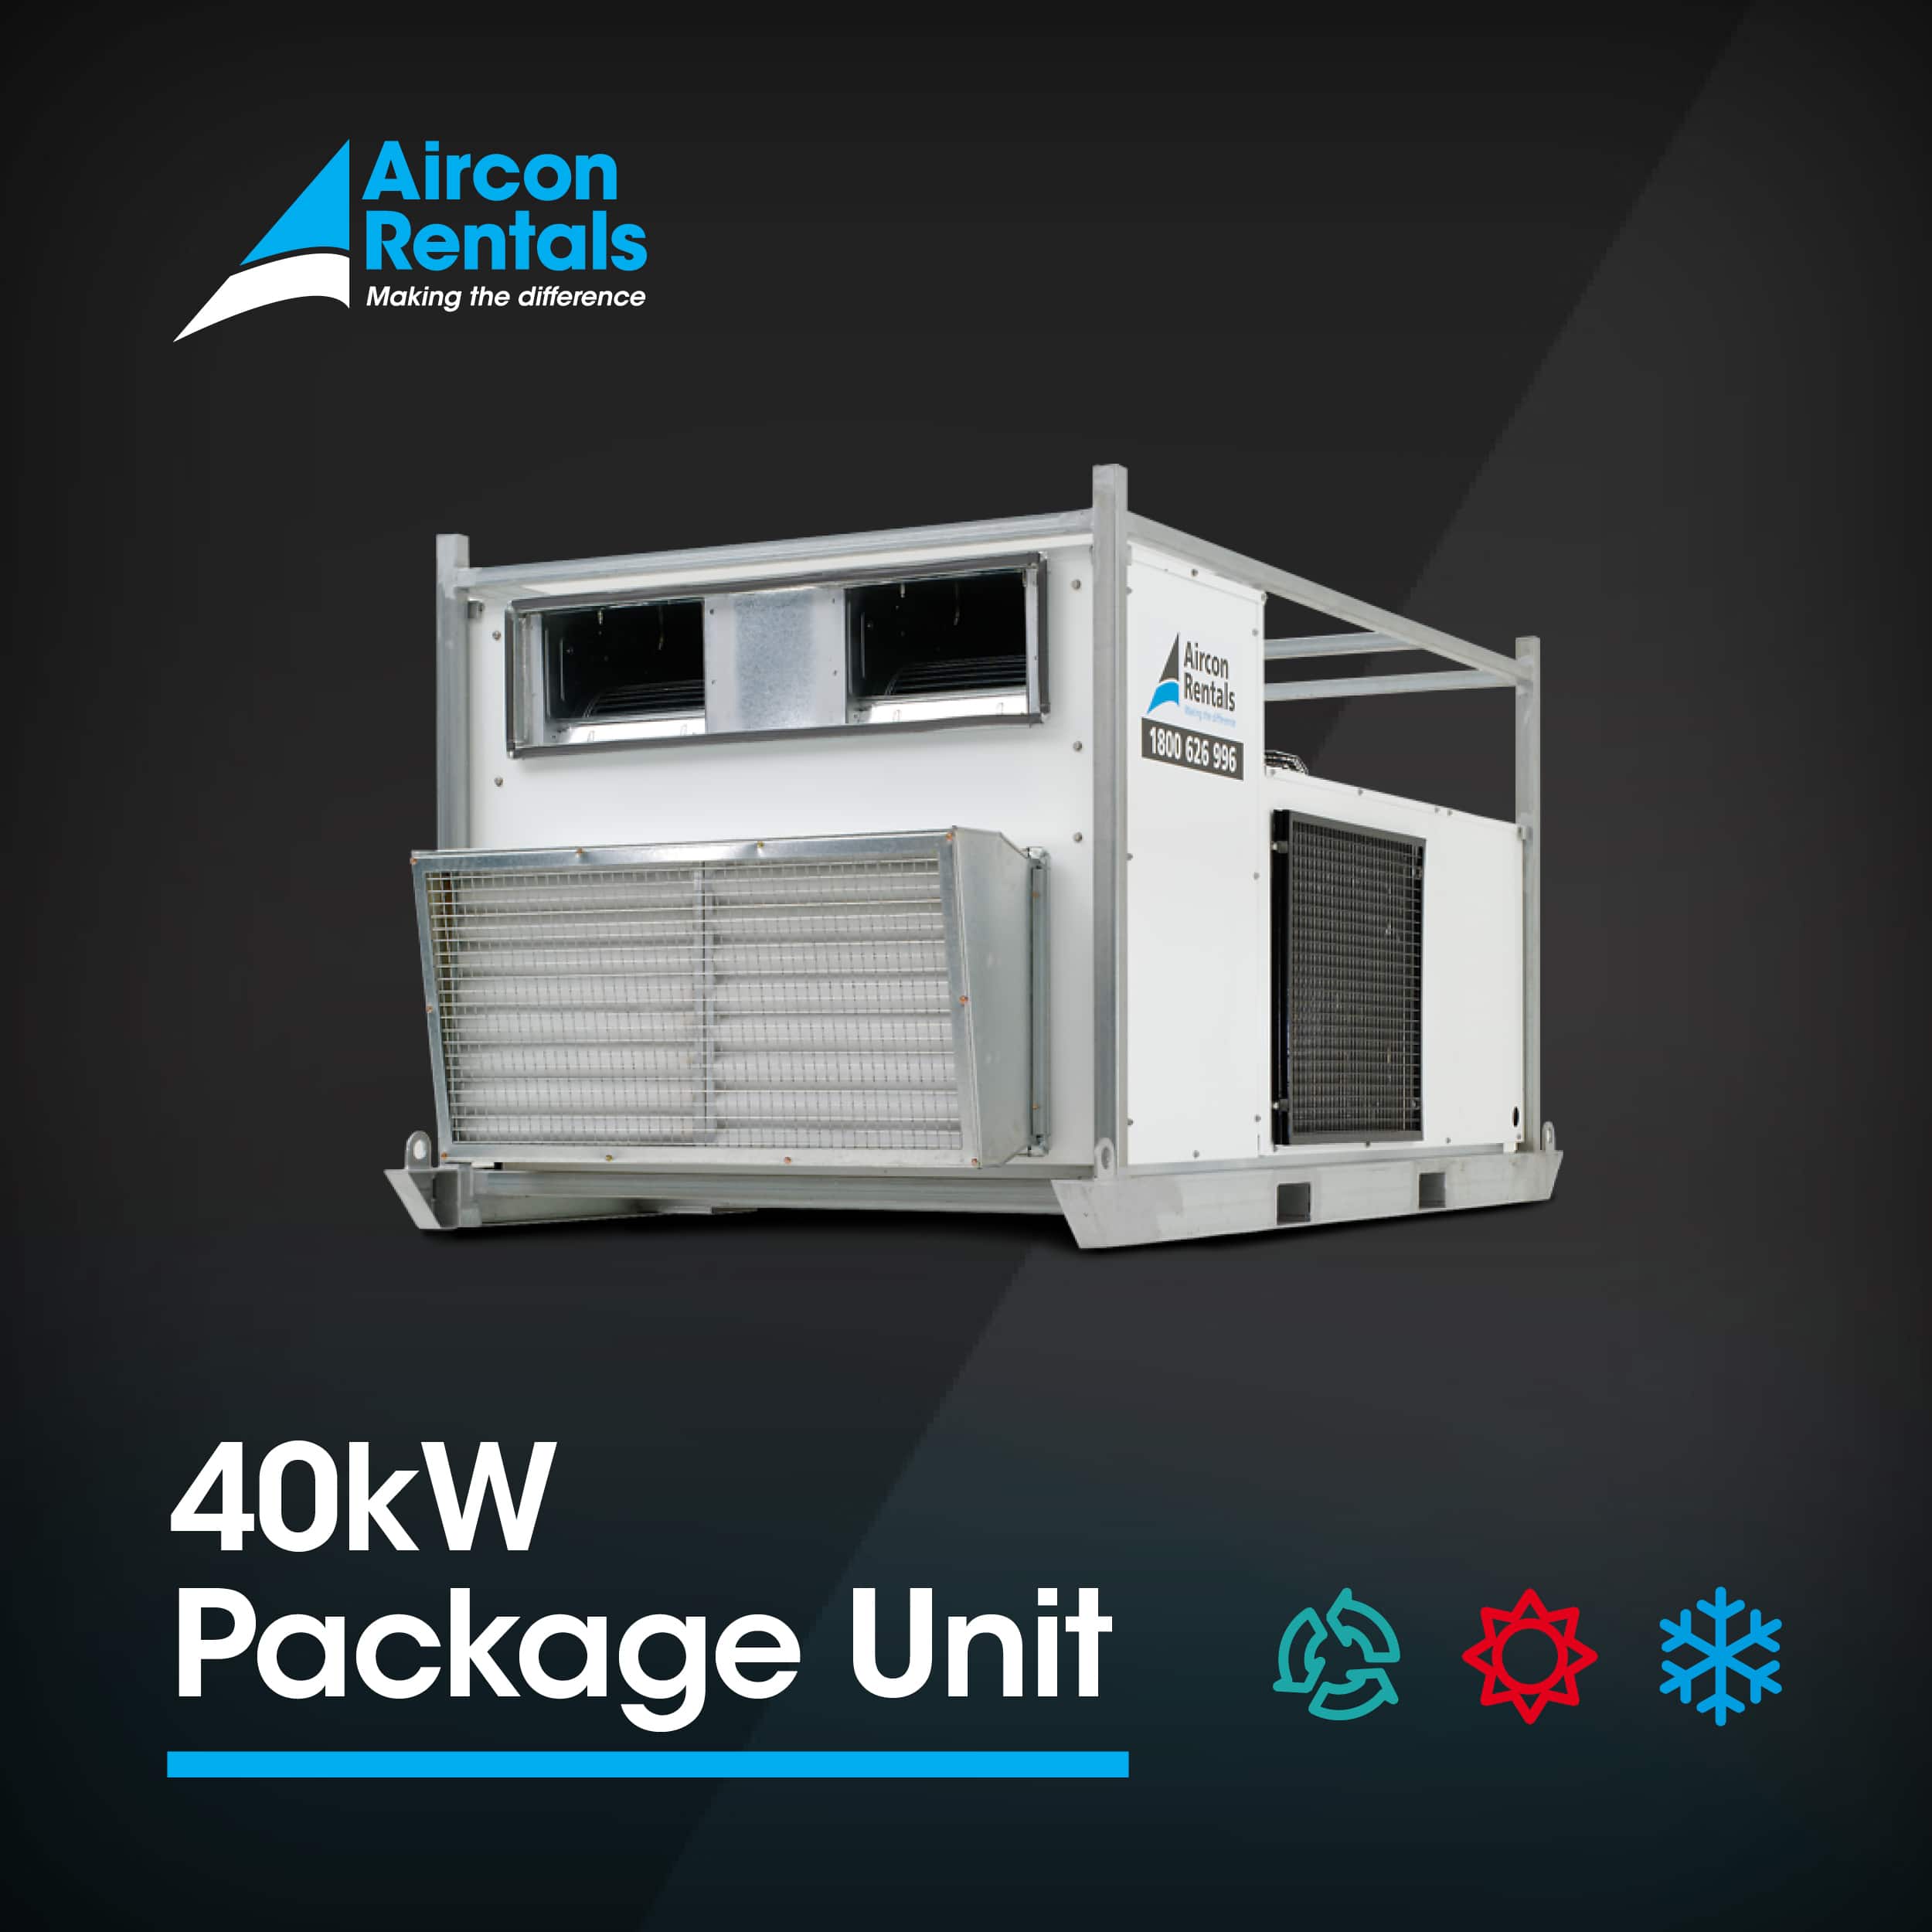 Air Conditioner Rental | Aircon Rentals 40kW Reverse Cycle Package Unit